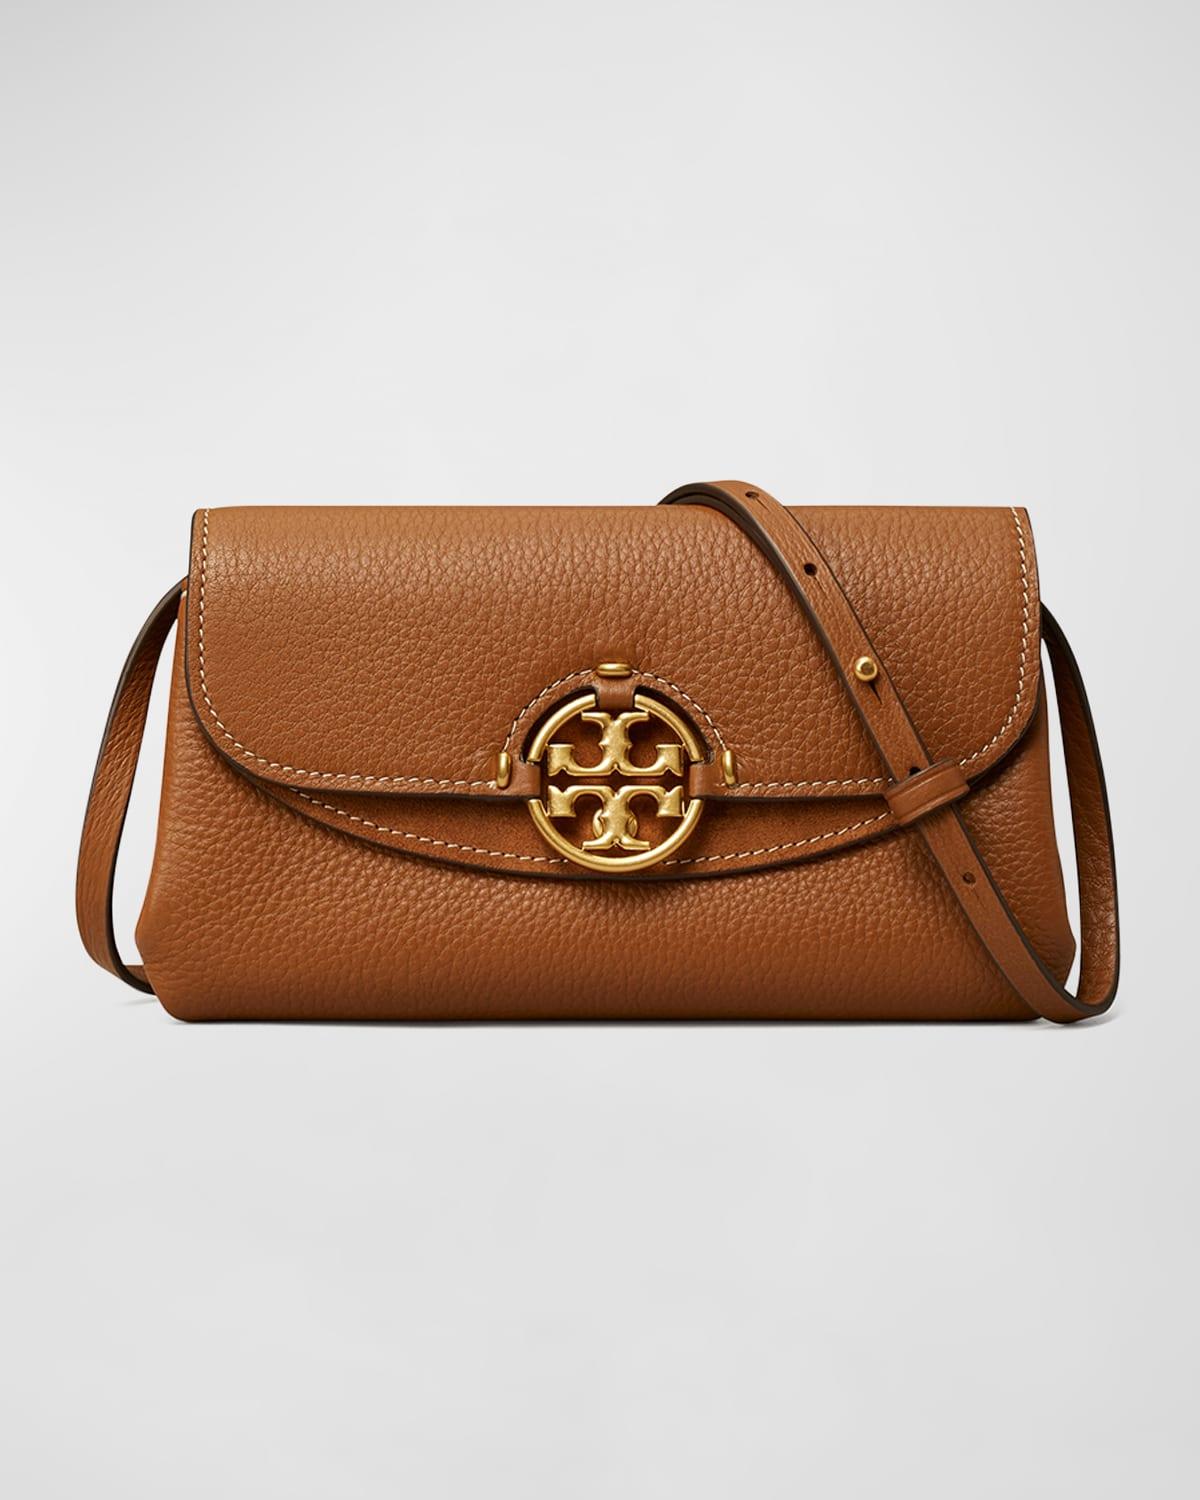 Tory Burch Miller Flap Leather Crossbody Bag in Brown | Lyst